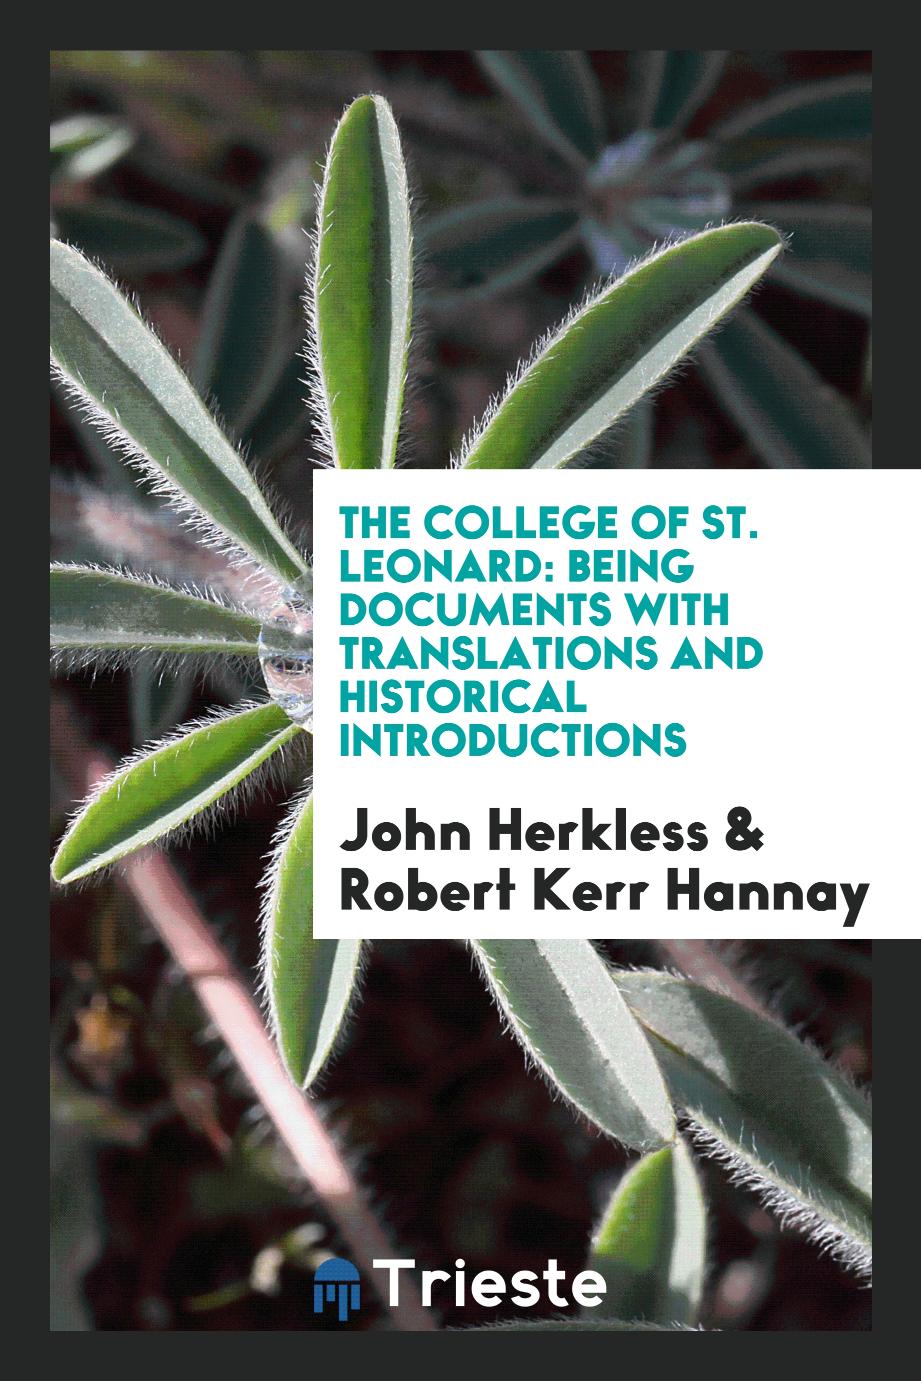 The College of St. Leonard: being documents with translations and historical introductions